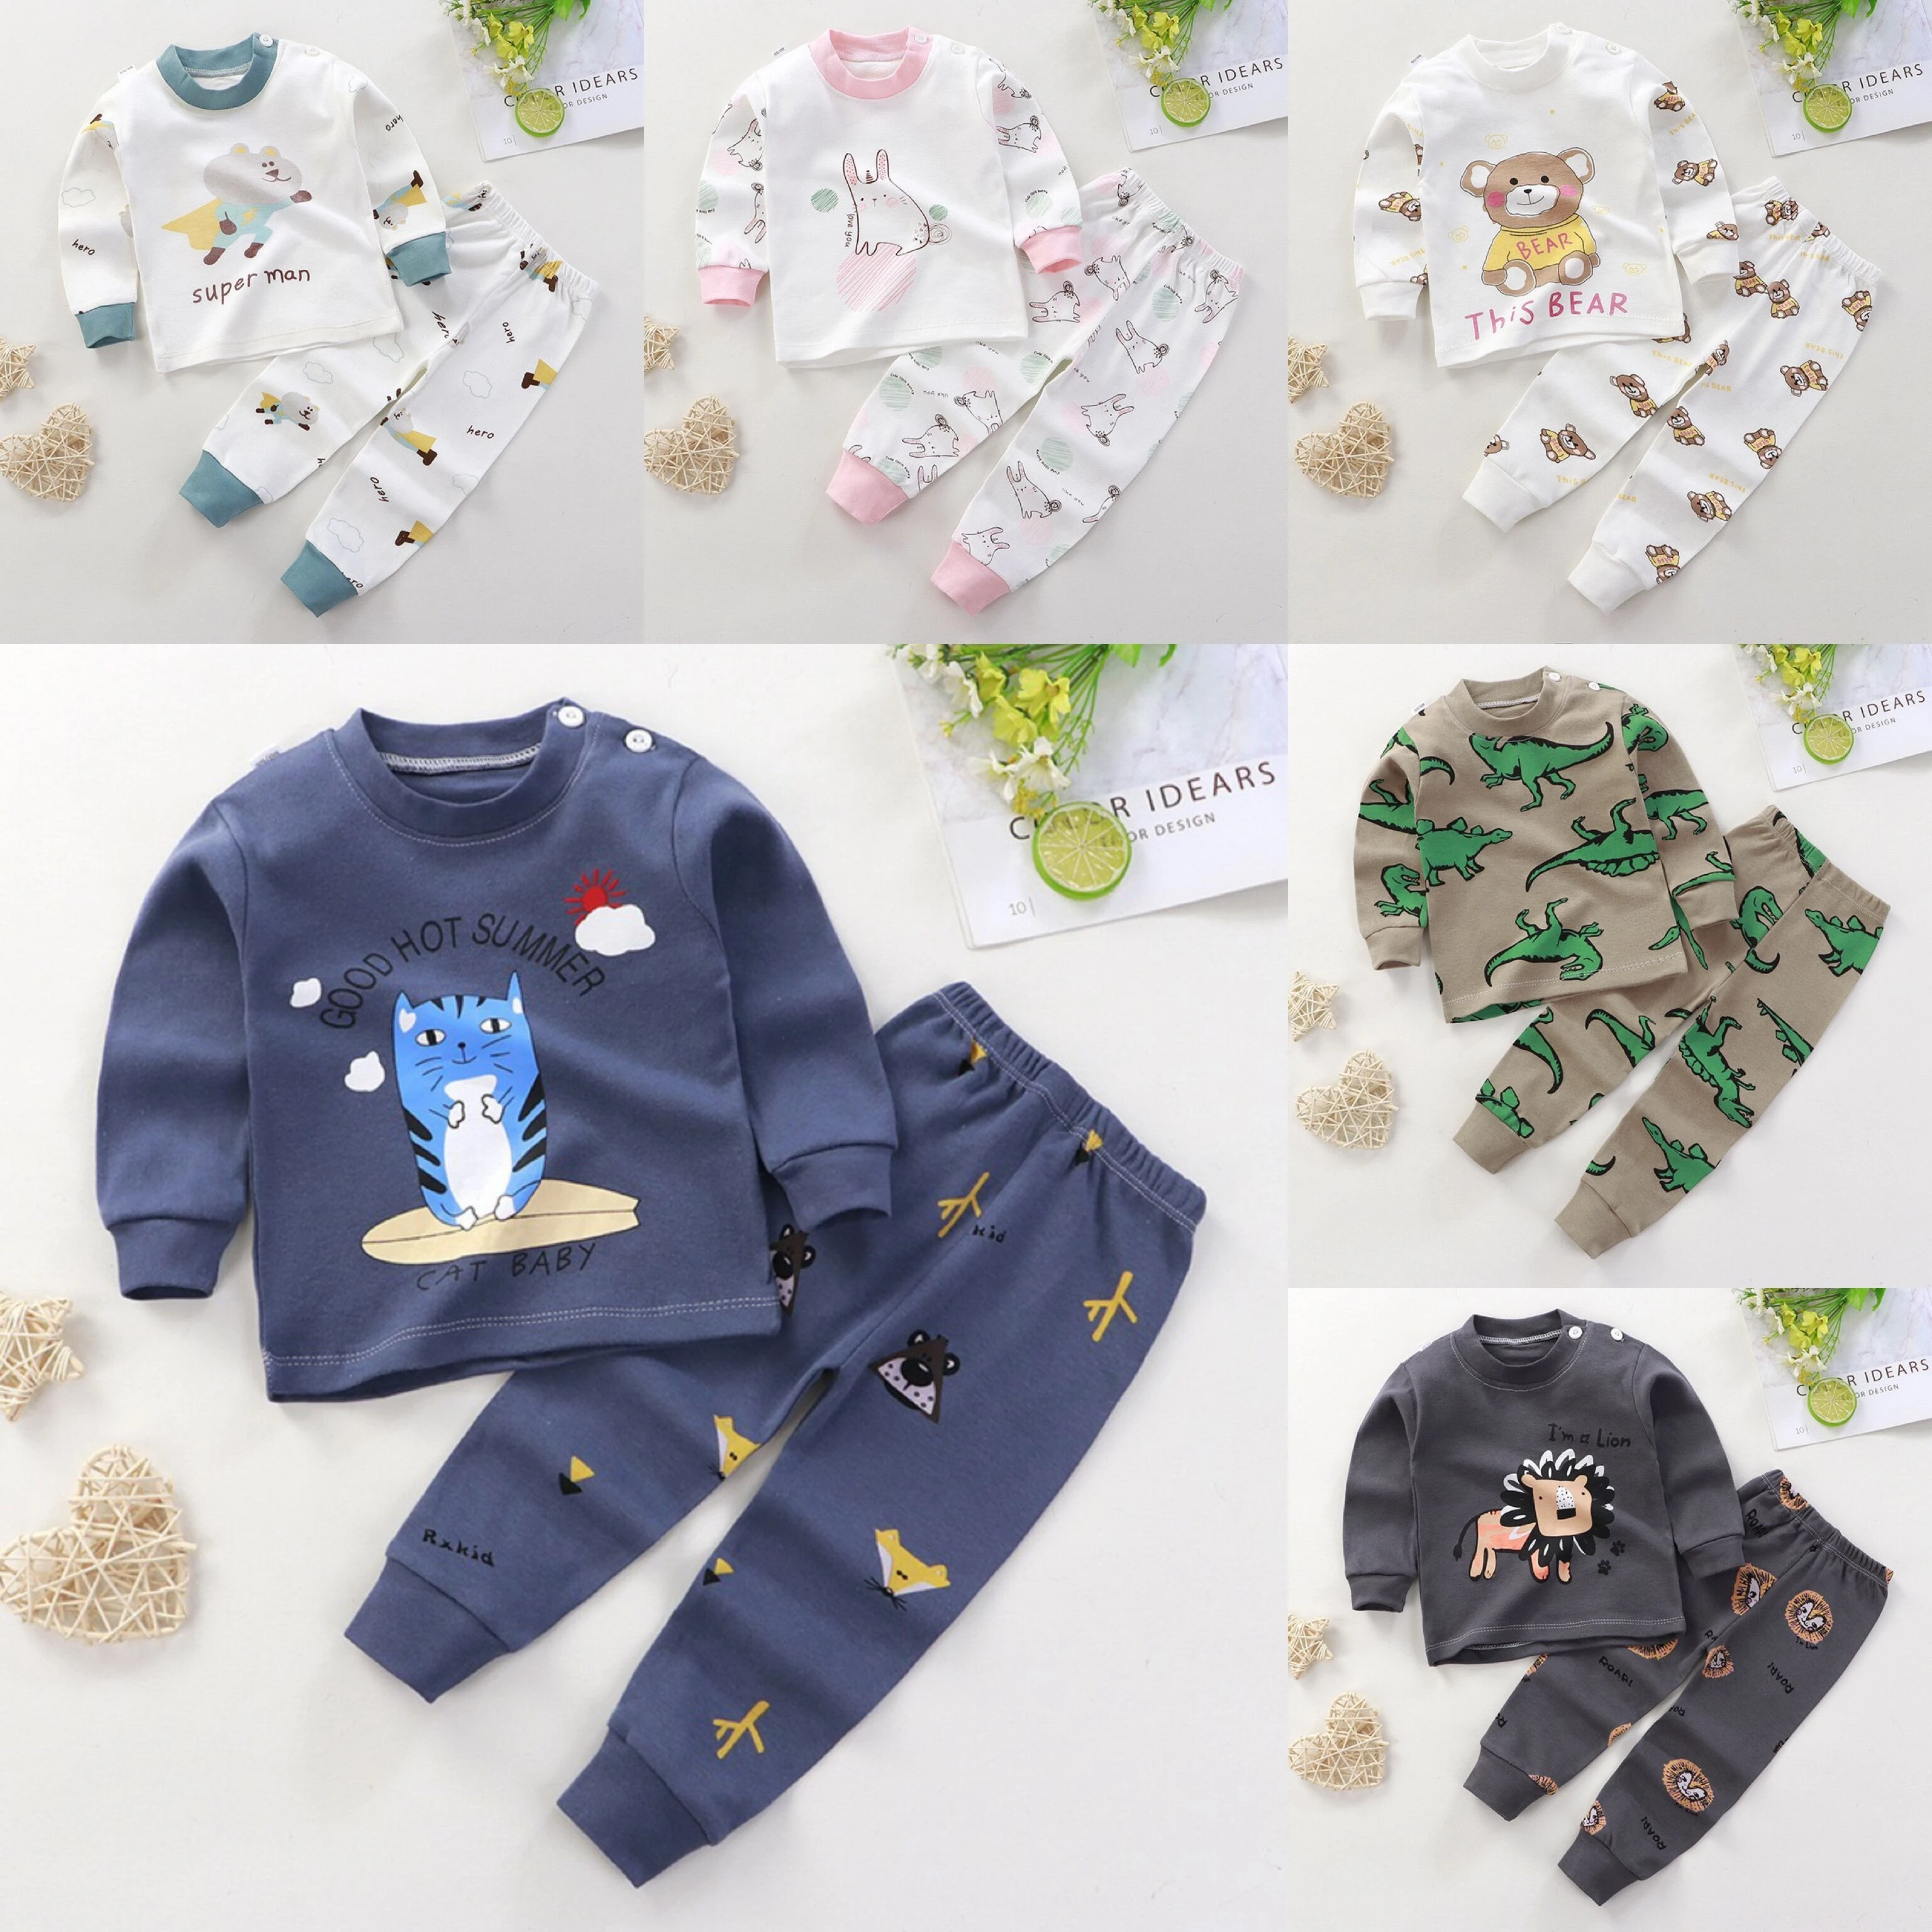 Baby Clothing Set best of sale 2pcs Baby Boys Clothes Suits Brand Newborn Infant Clothing Sets Girls Long Sleeved Tops+pants Suit Kids Bebes Underwear newborn baby clothing set